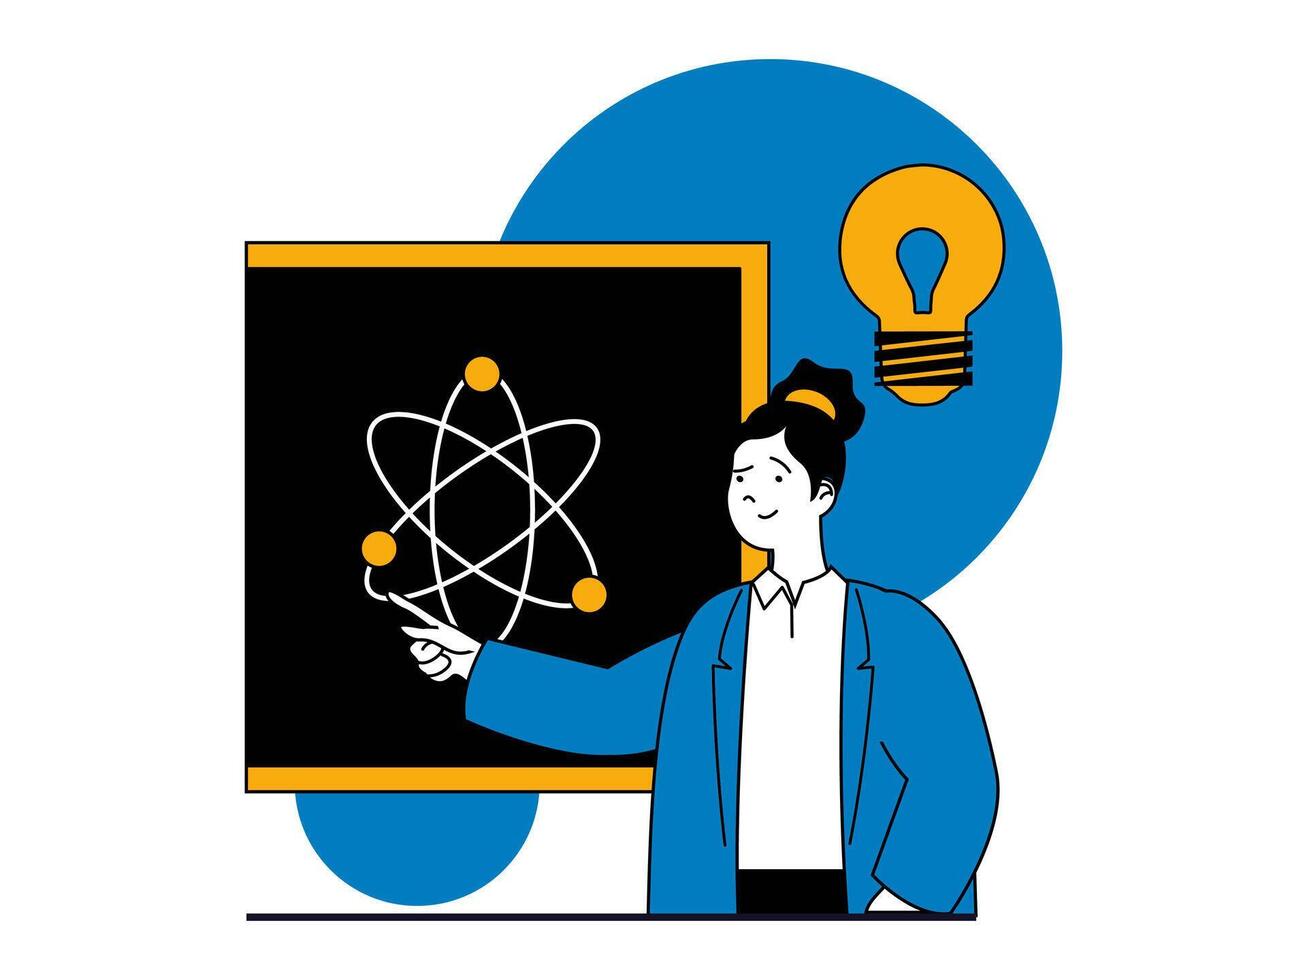 Education concept with character situation. Teacher points to atom structure and explains new material at physics lesson in classroom. Vector illustrations with people scene in flat design for web